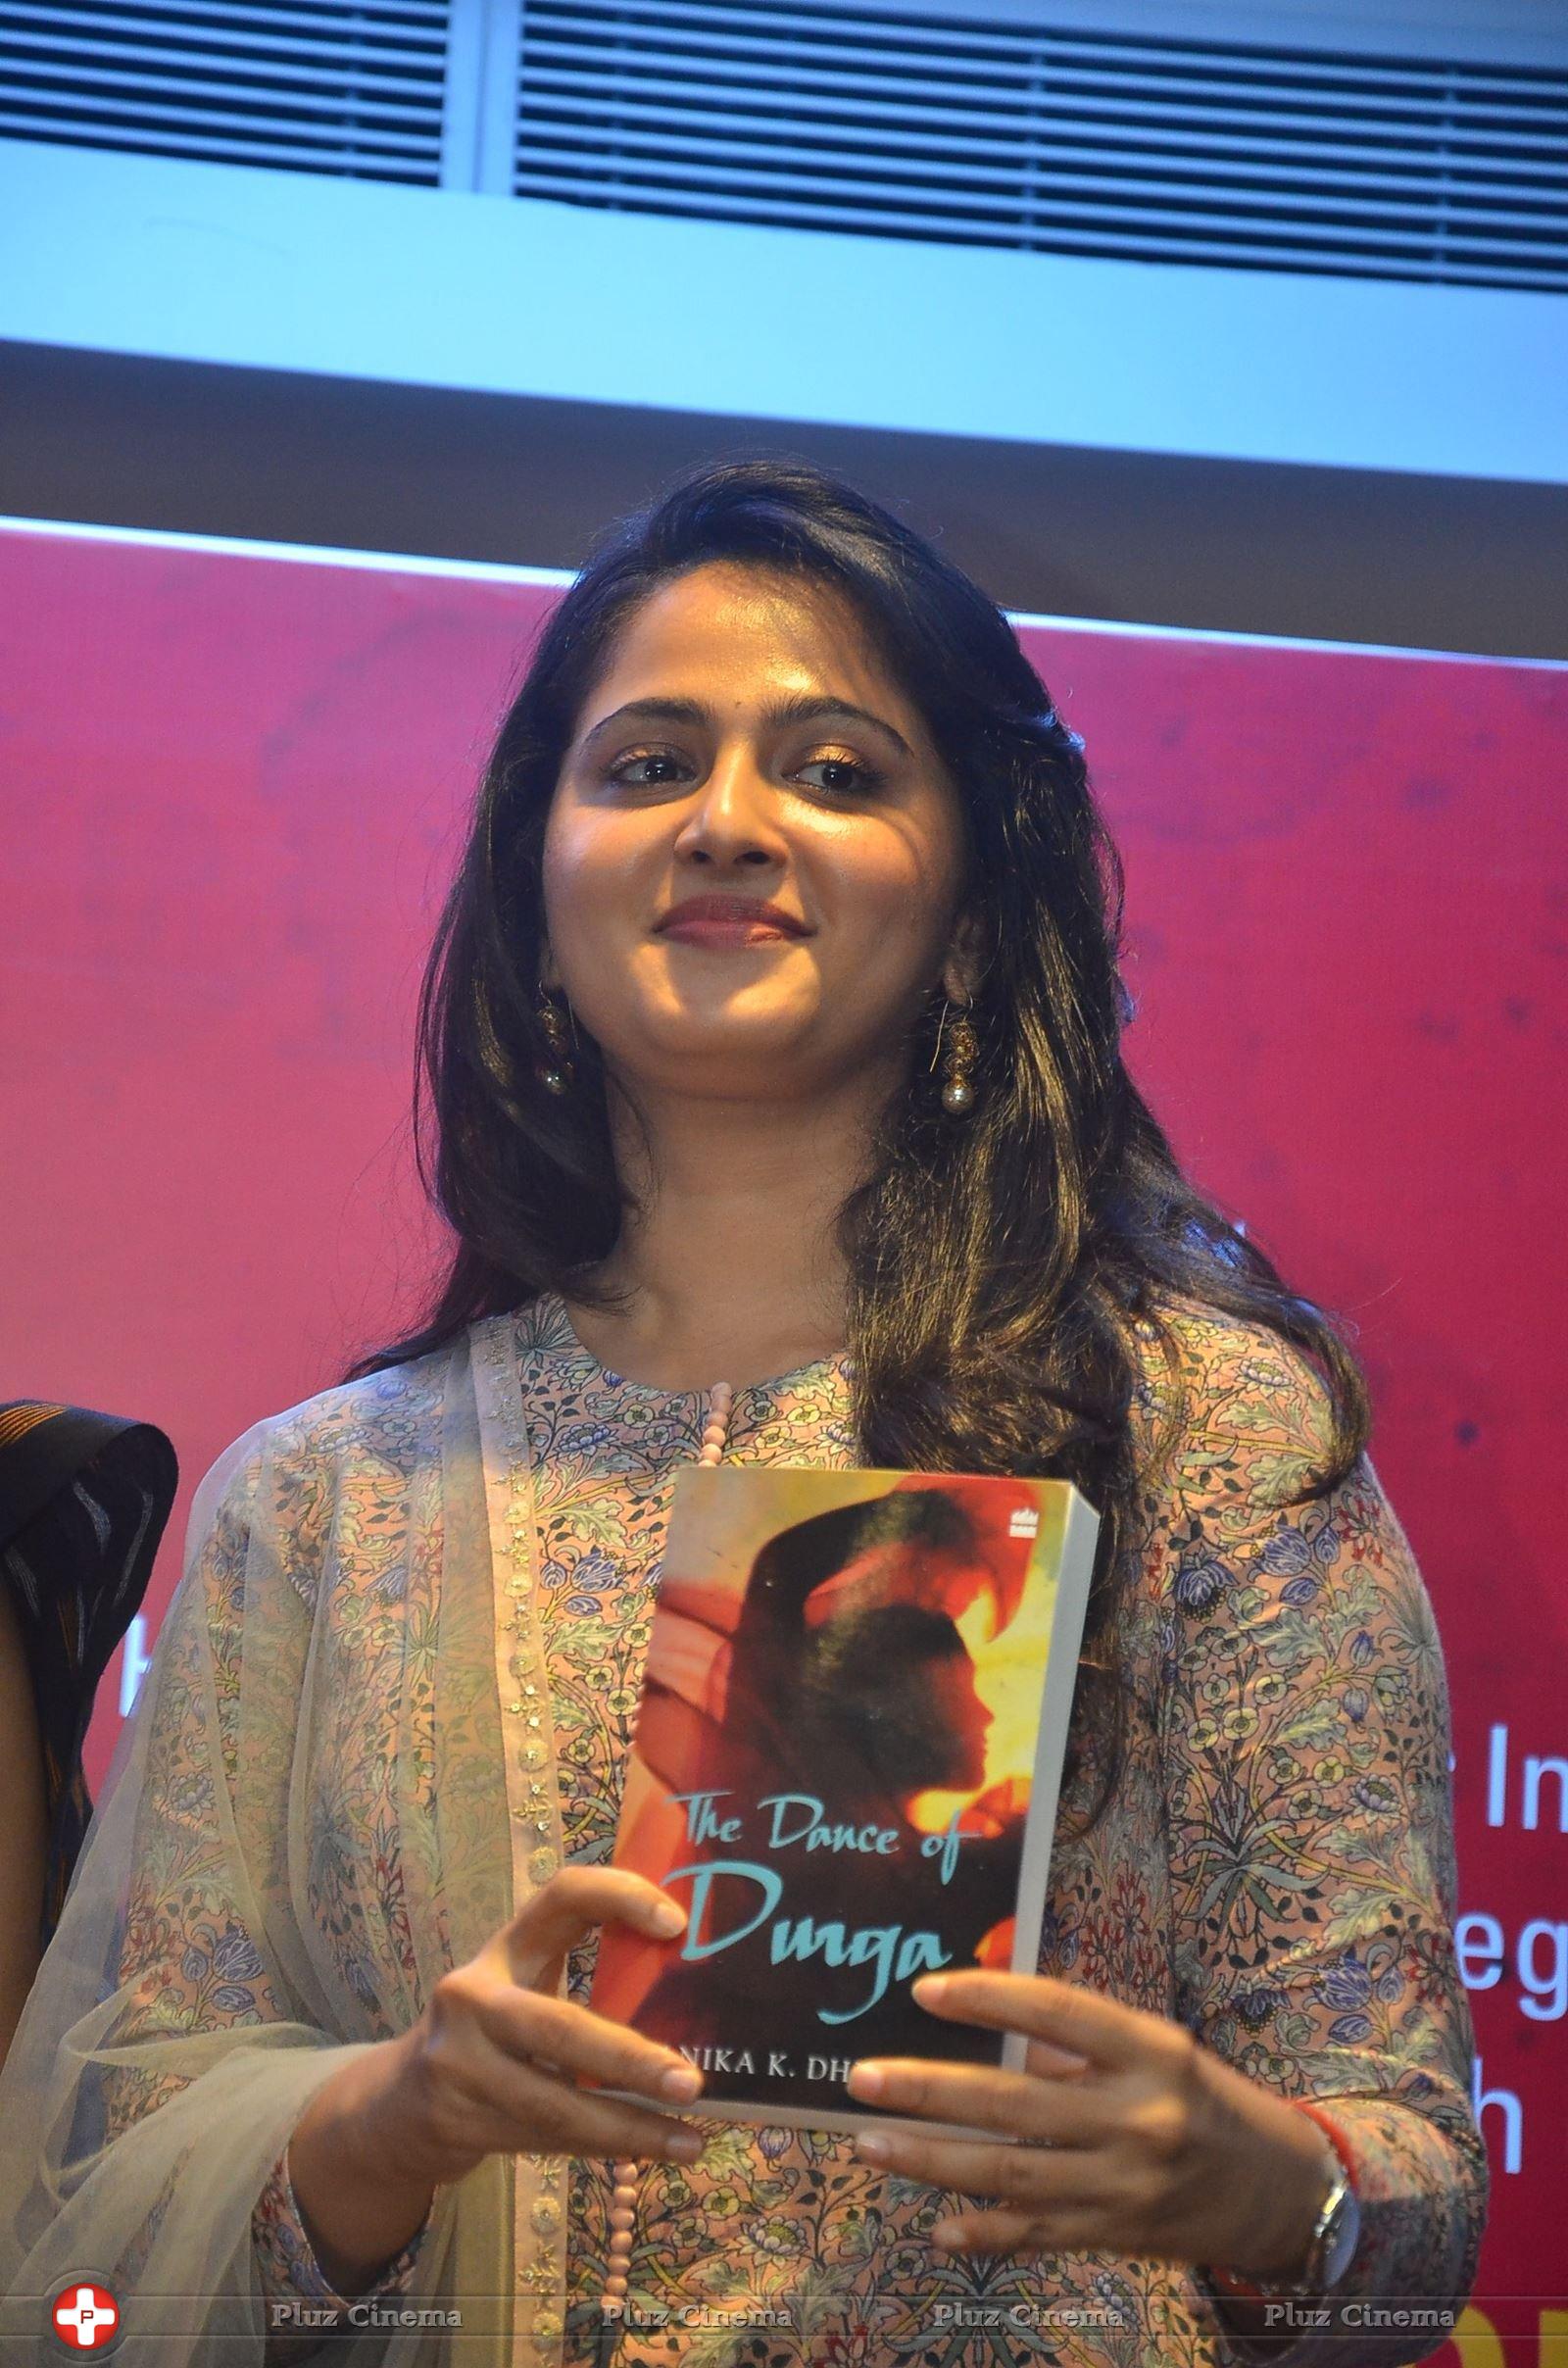 Anushka Shetty - The Dance Of Durga Book Launch Event Photos | Picture 1338281